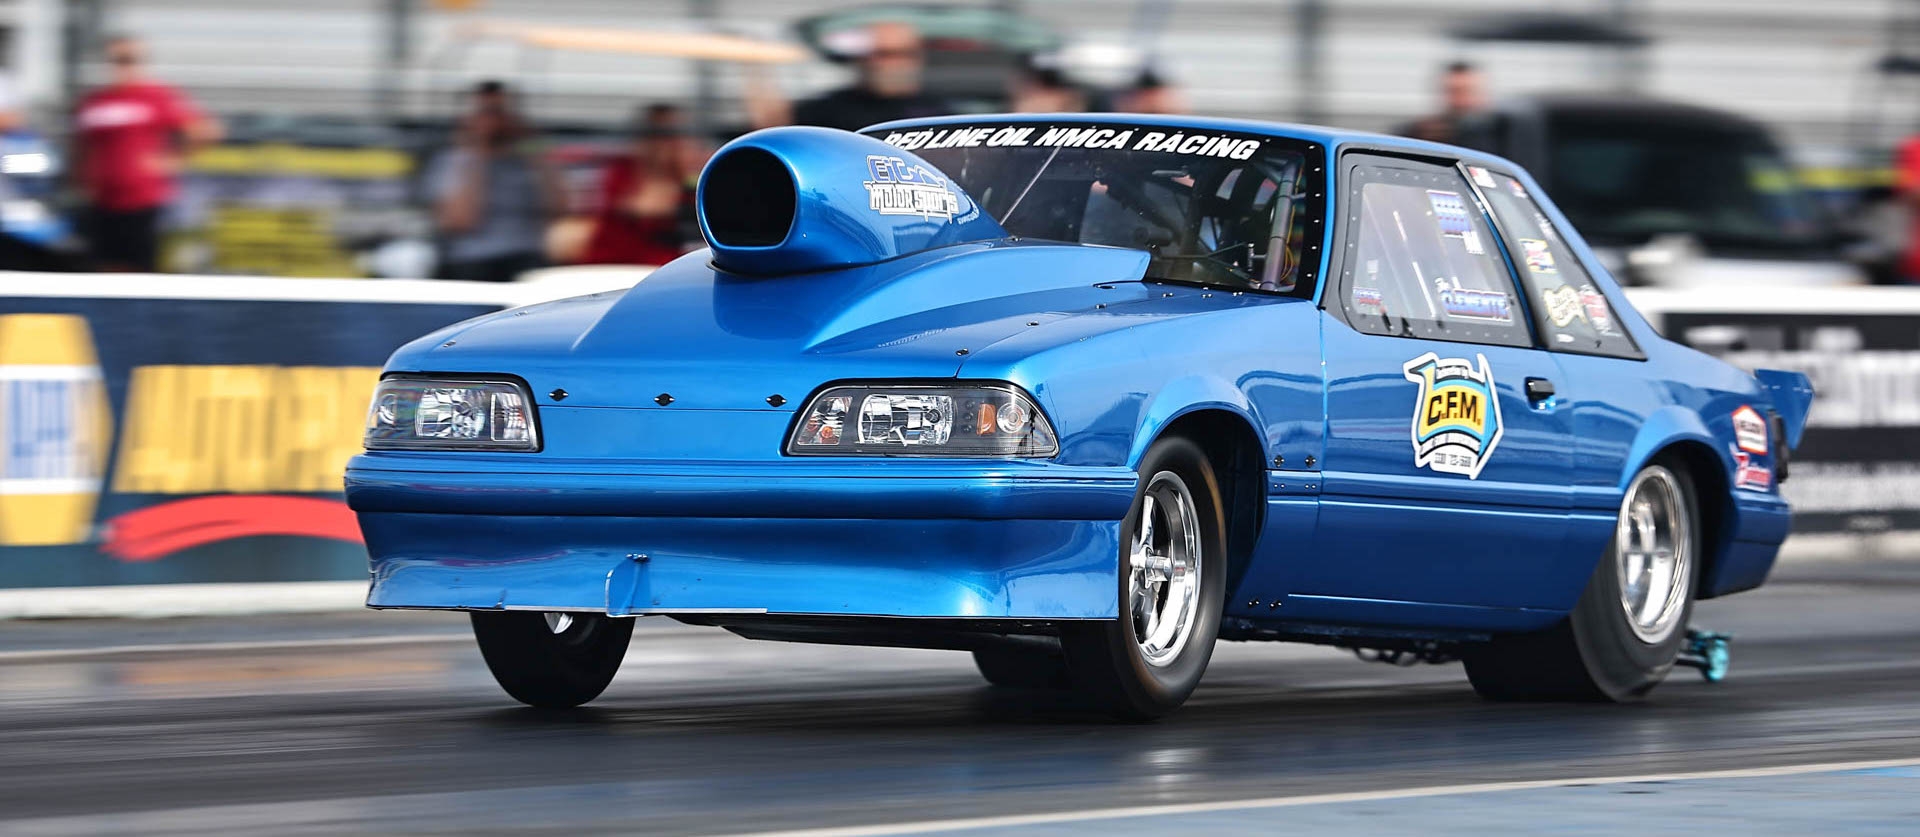 Points Race Heats Up At Mid-Season in Red Line Oil Synthetic Oil NMCA Drag Racing Series